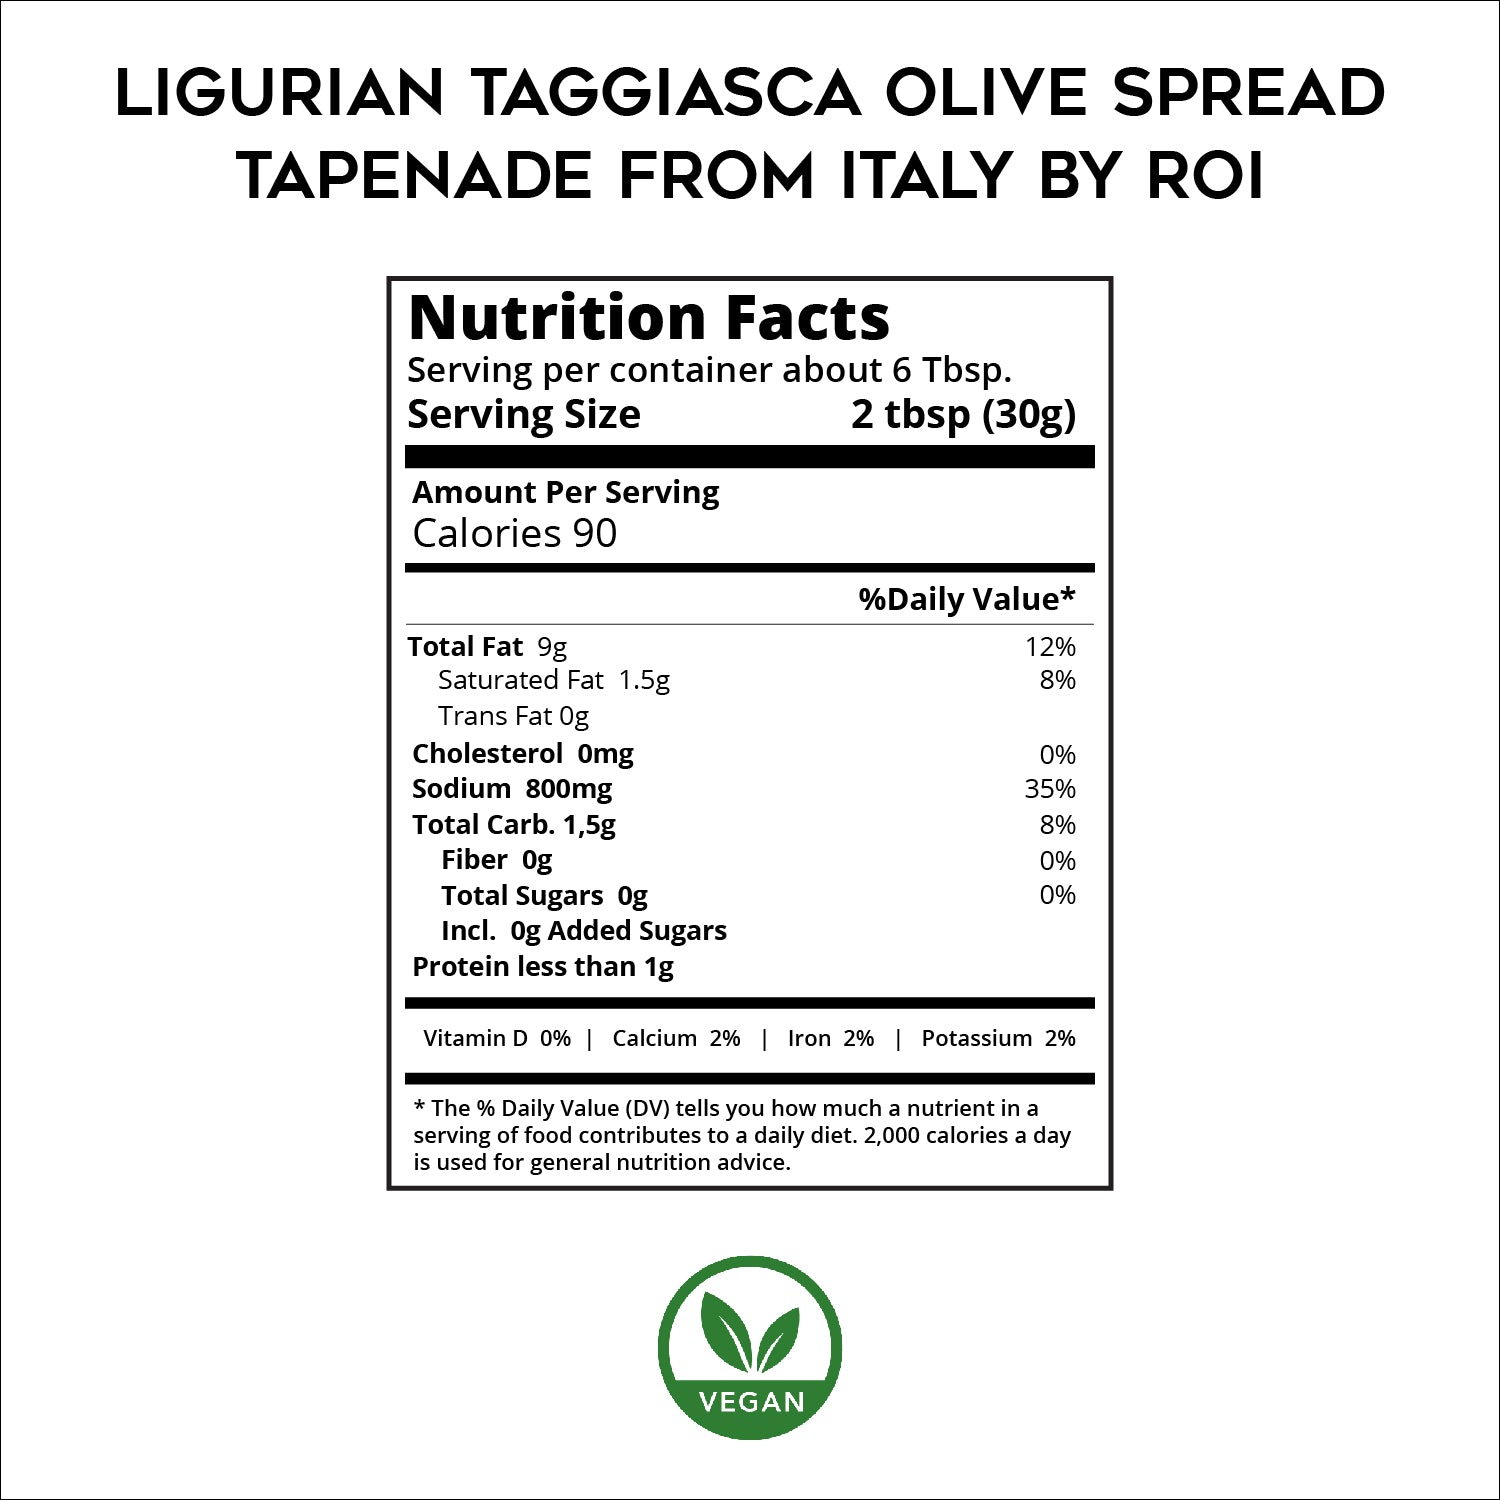 Ligurian Taggiasca Olive Spread - Tapenade From Italy by ROI